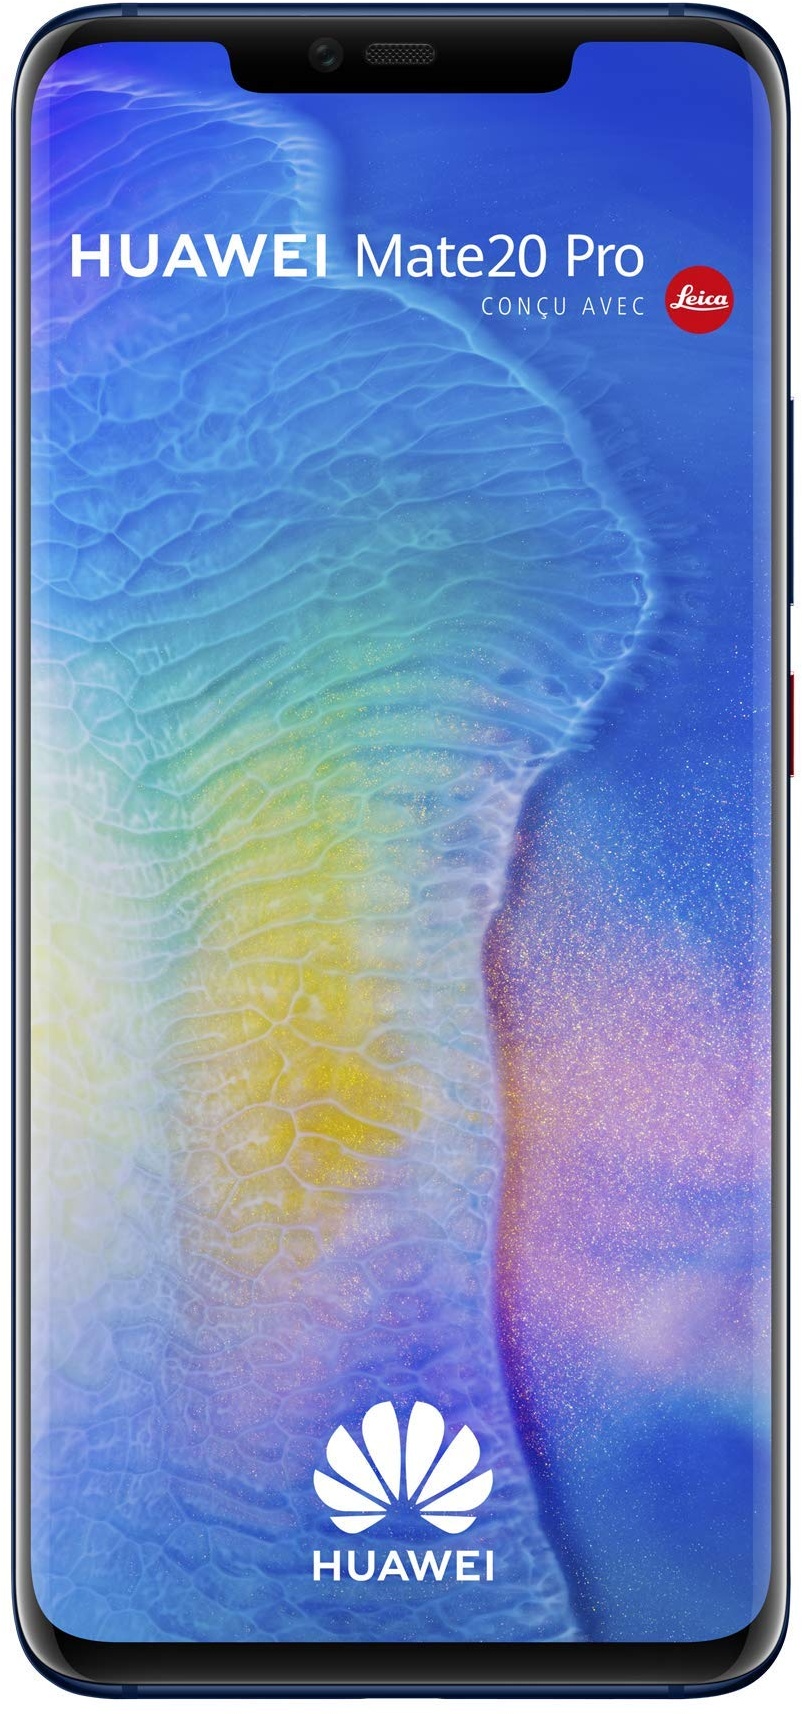 Huawei Mate 20 Pro 128GB Handy, Android 9.0 (Pie), Dual SIM, midnight blue (West European Version)